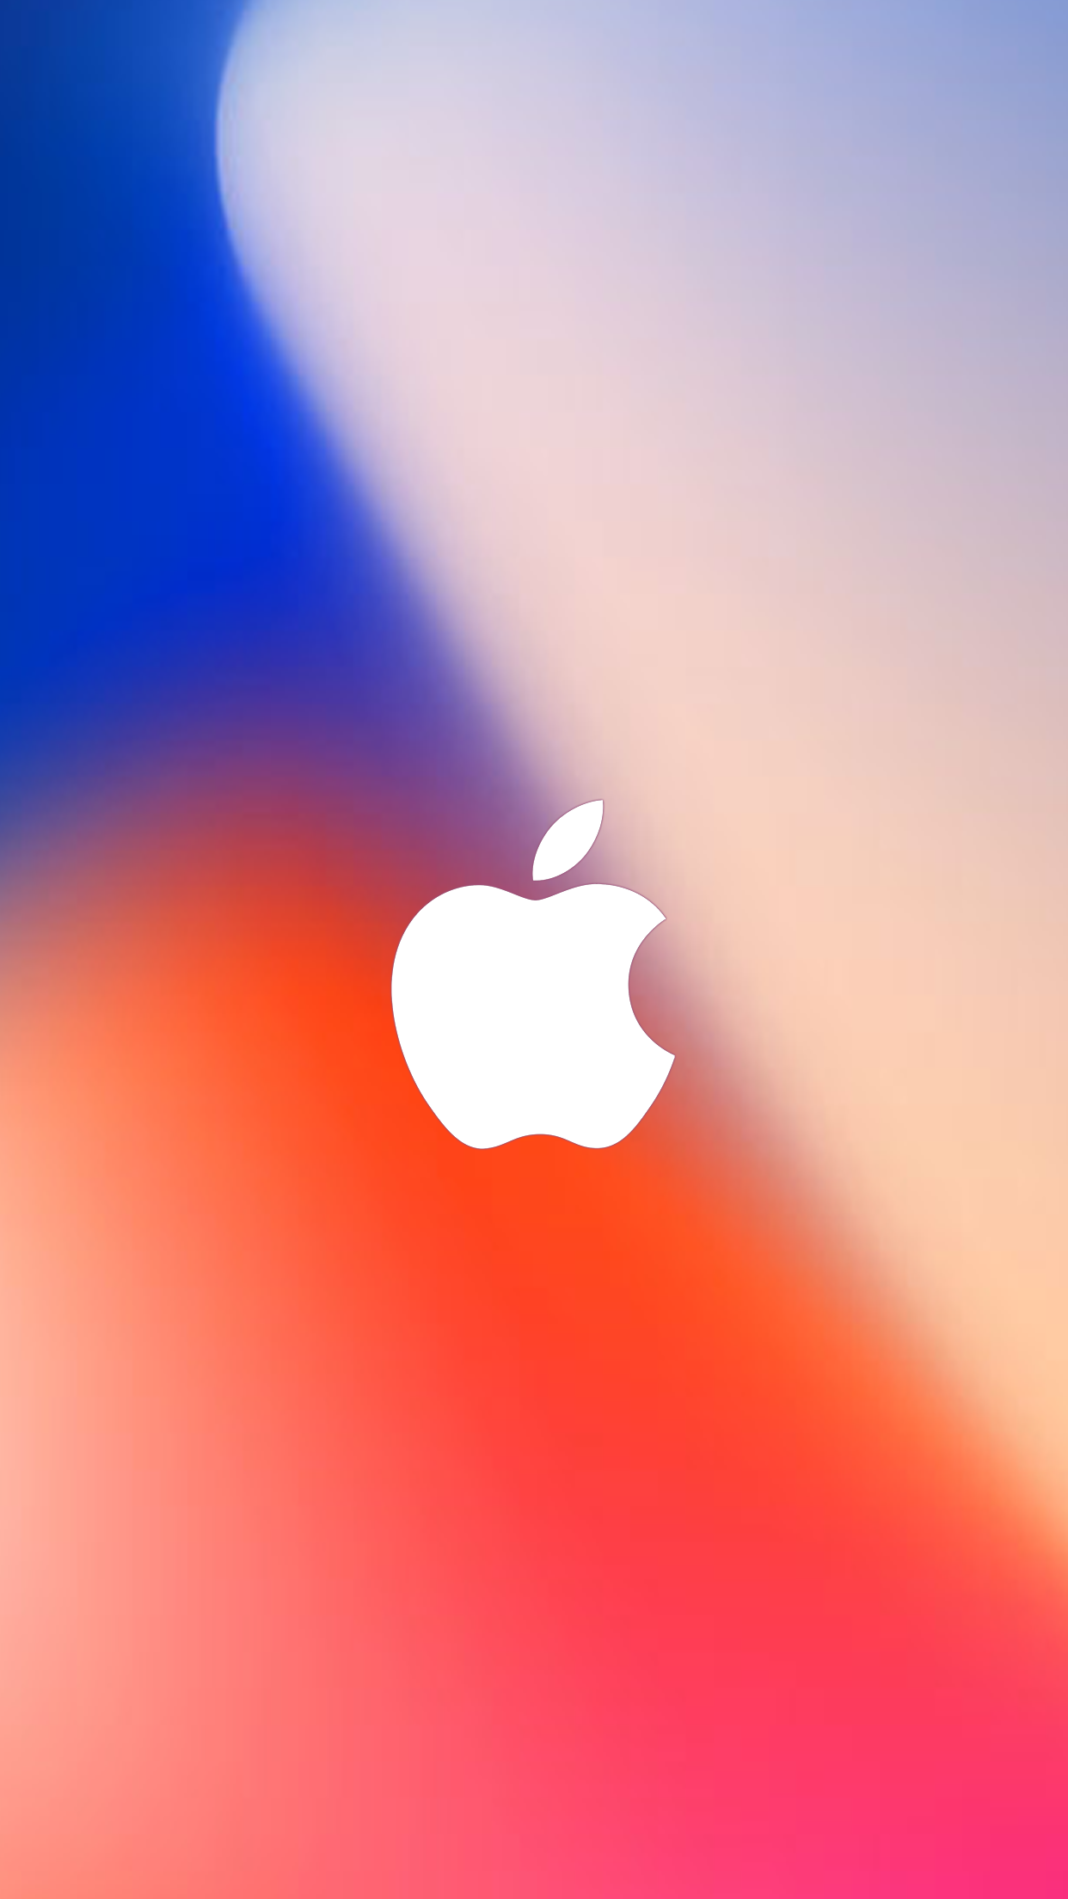 50 Apple iPhone Wallpapers For Free Download